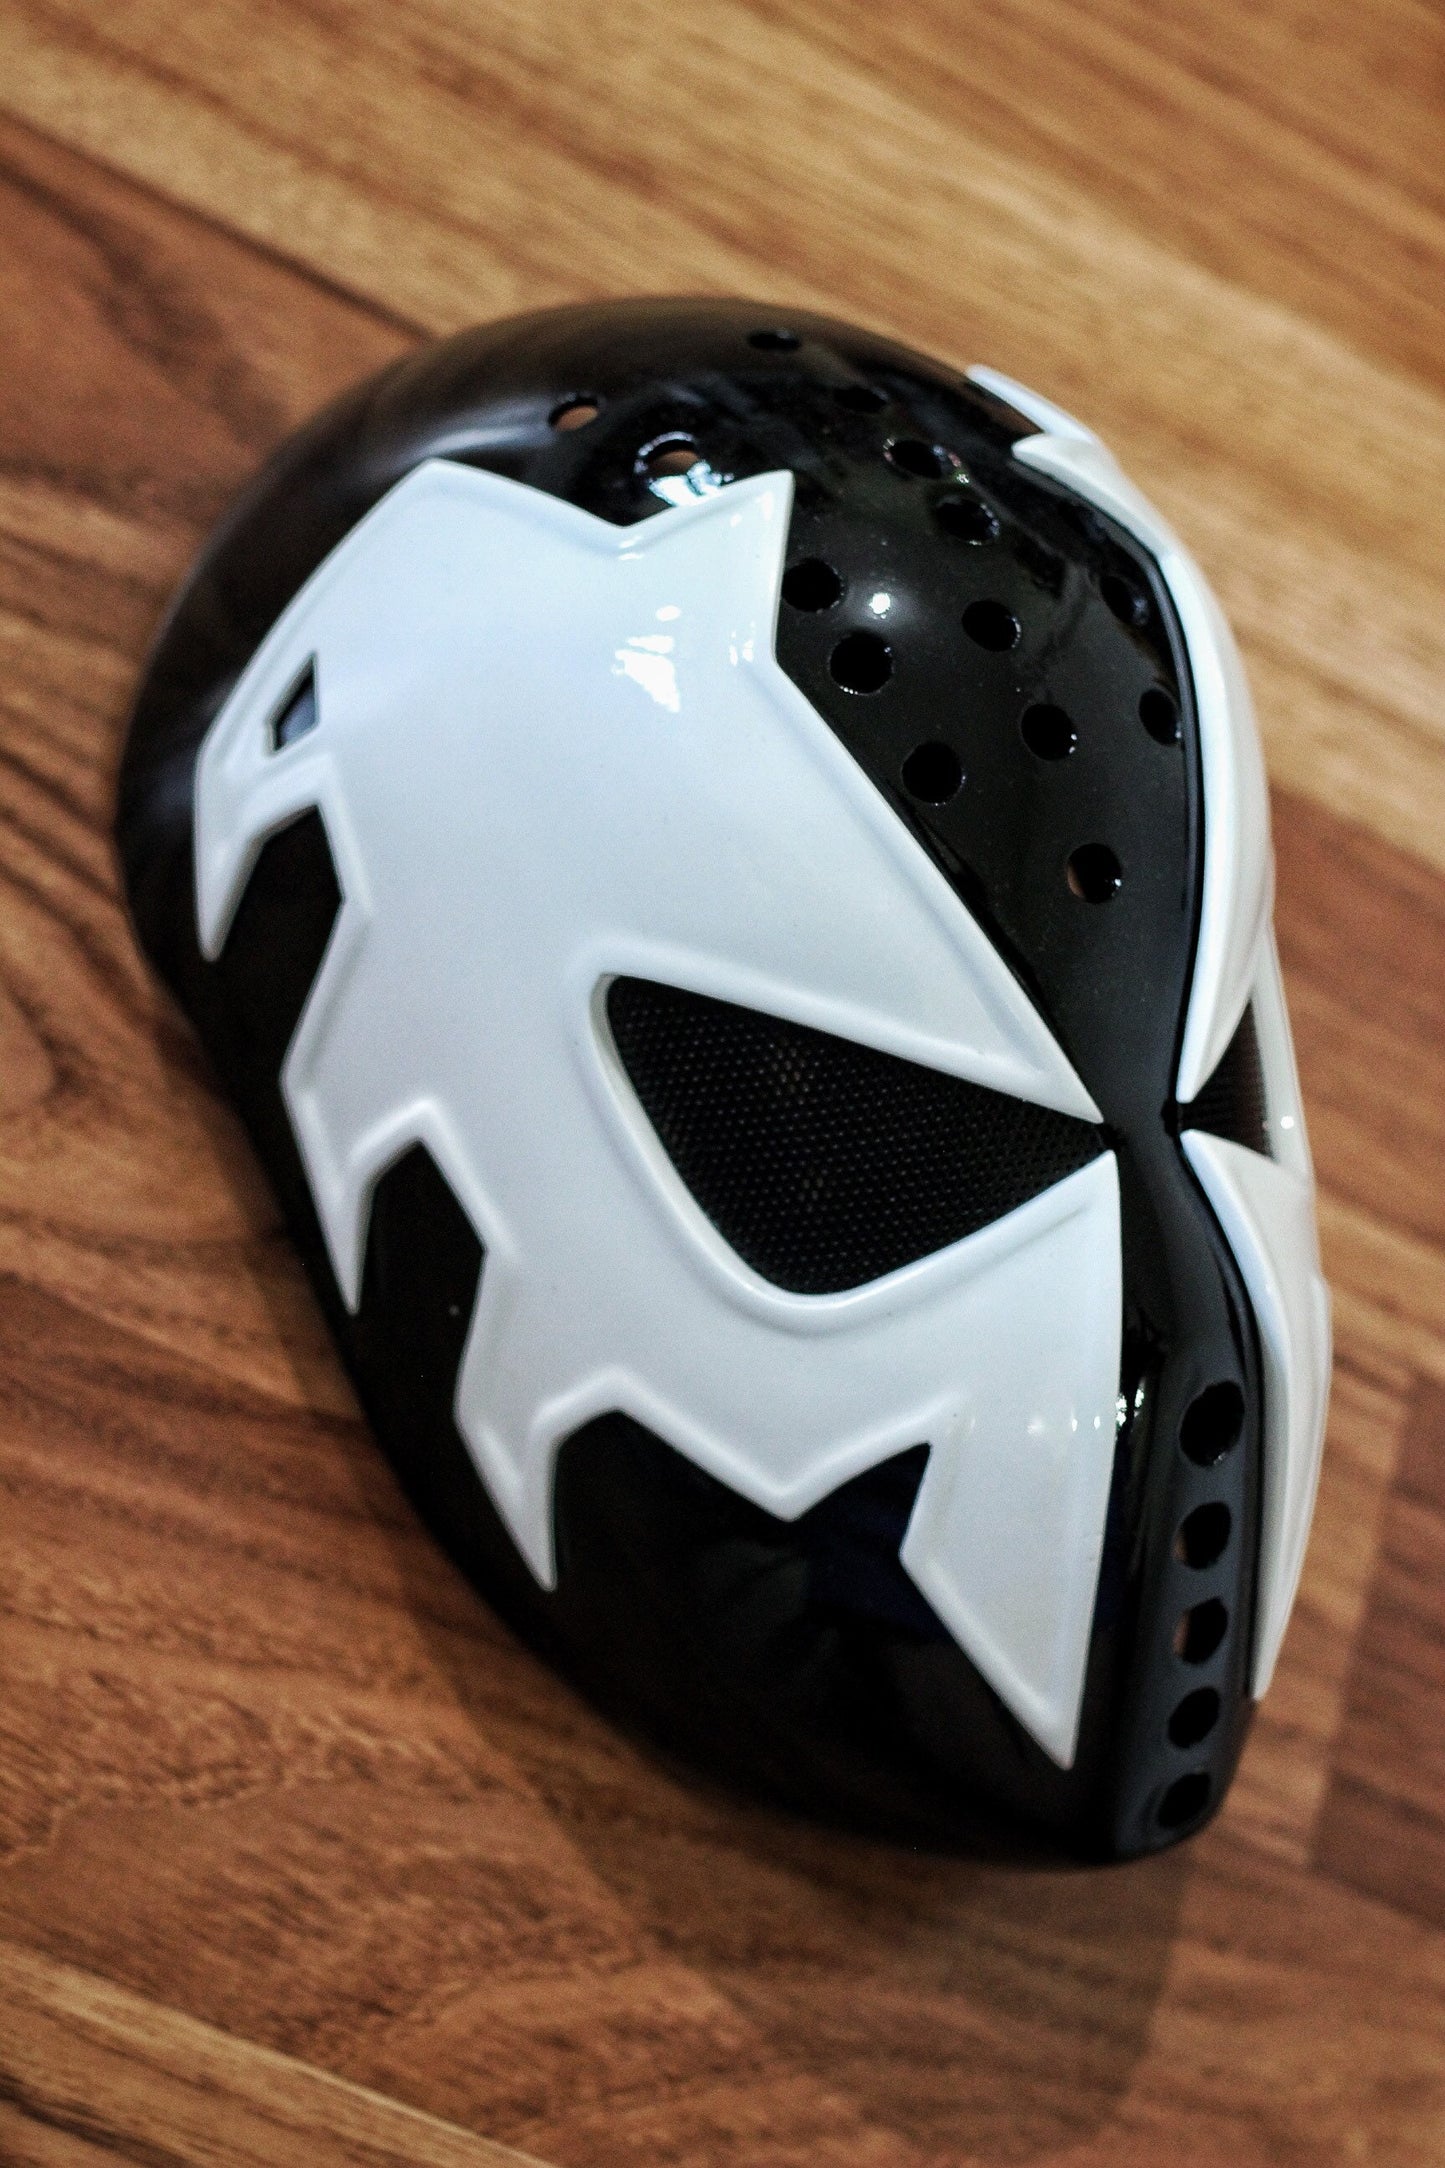 Spiderman symbiote 2099 faceshell and lenses